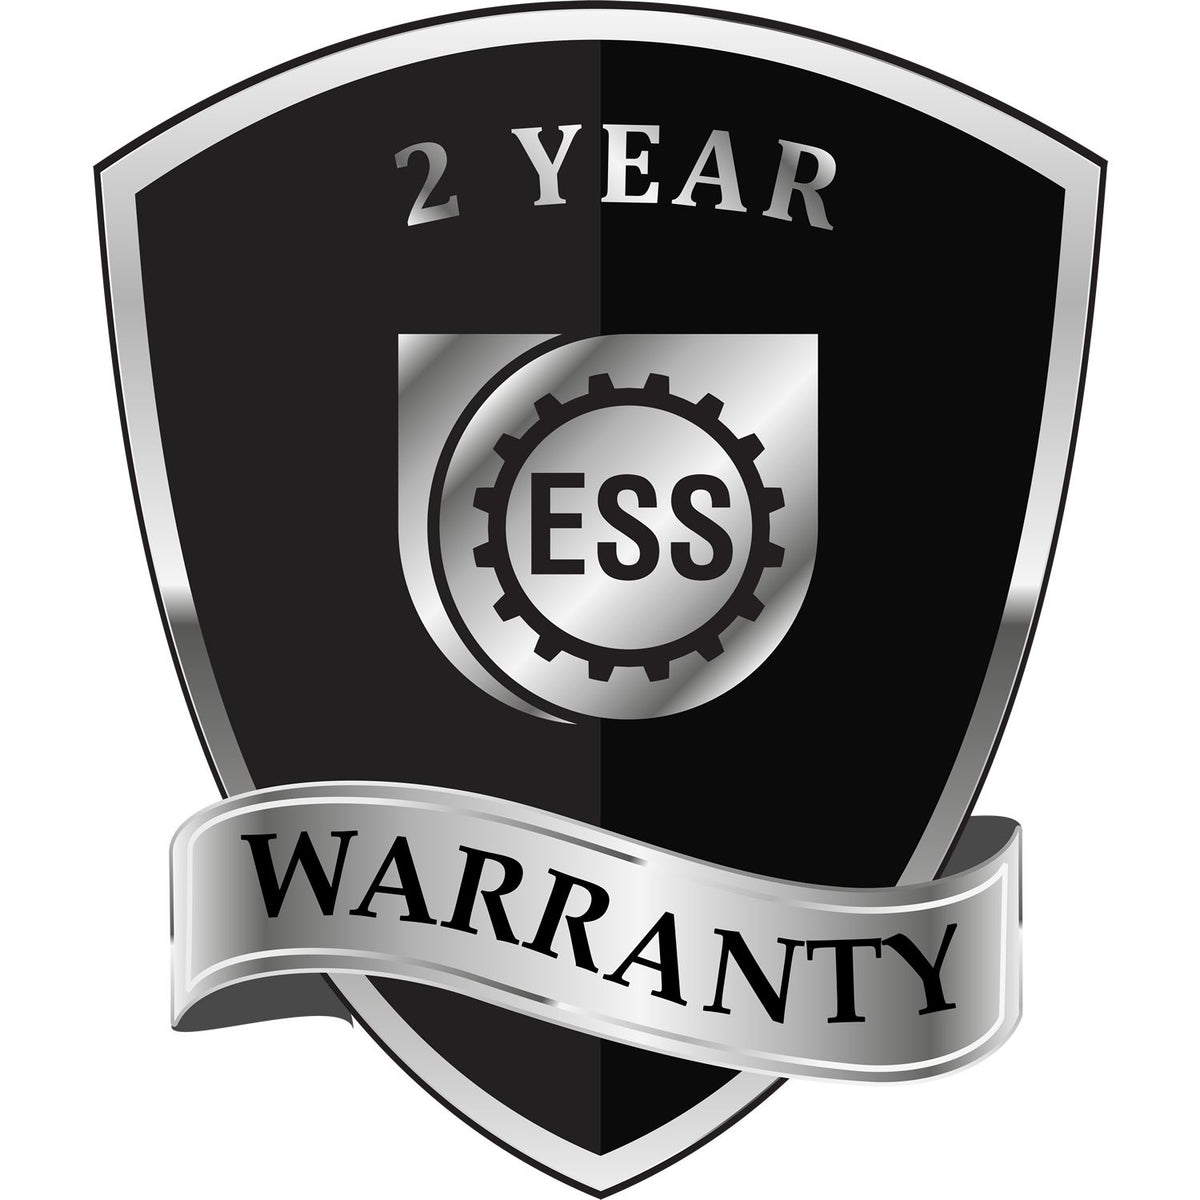 A badge or emblem showing a warranty icon for the Heavy Duty Cast Iron Louisiana Architect Embosser